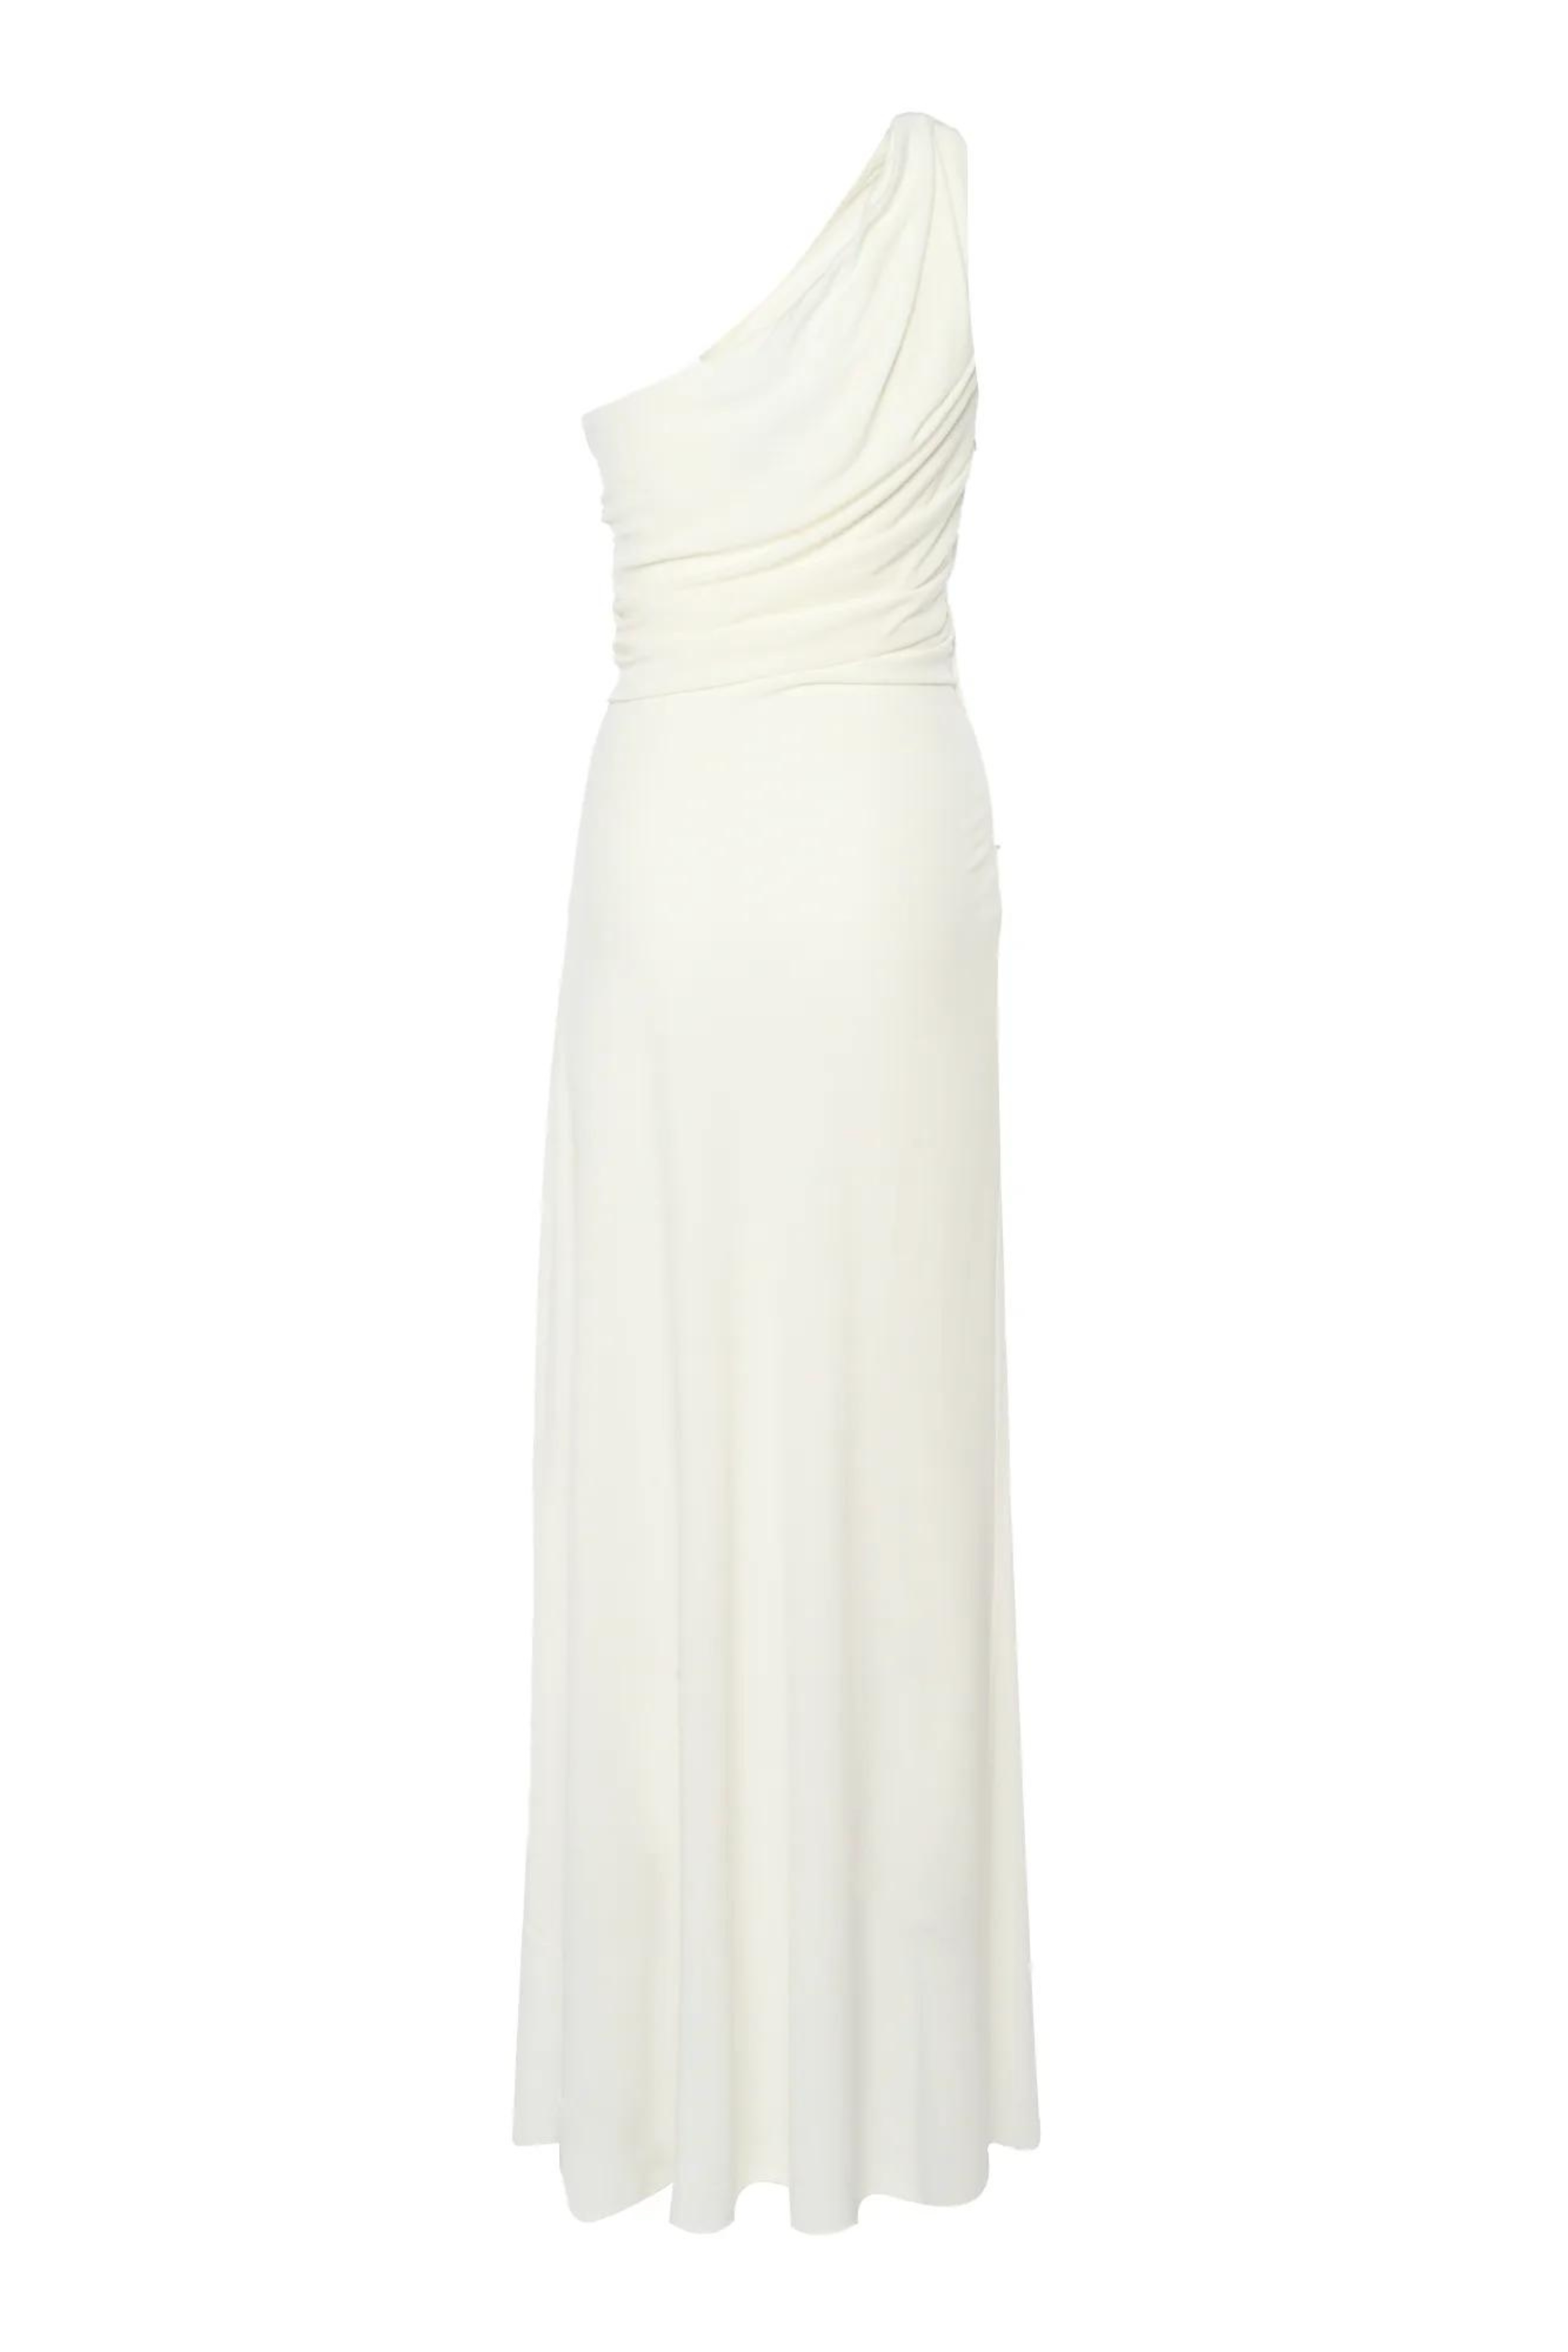 One-Shoulder Gown by Alberta Ferretti, composition 100% Viscose, Colour: White, sleeveless with a long flared hem, Made in Italy, New Arrivals at Espace Cannelle, SS23 Collection